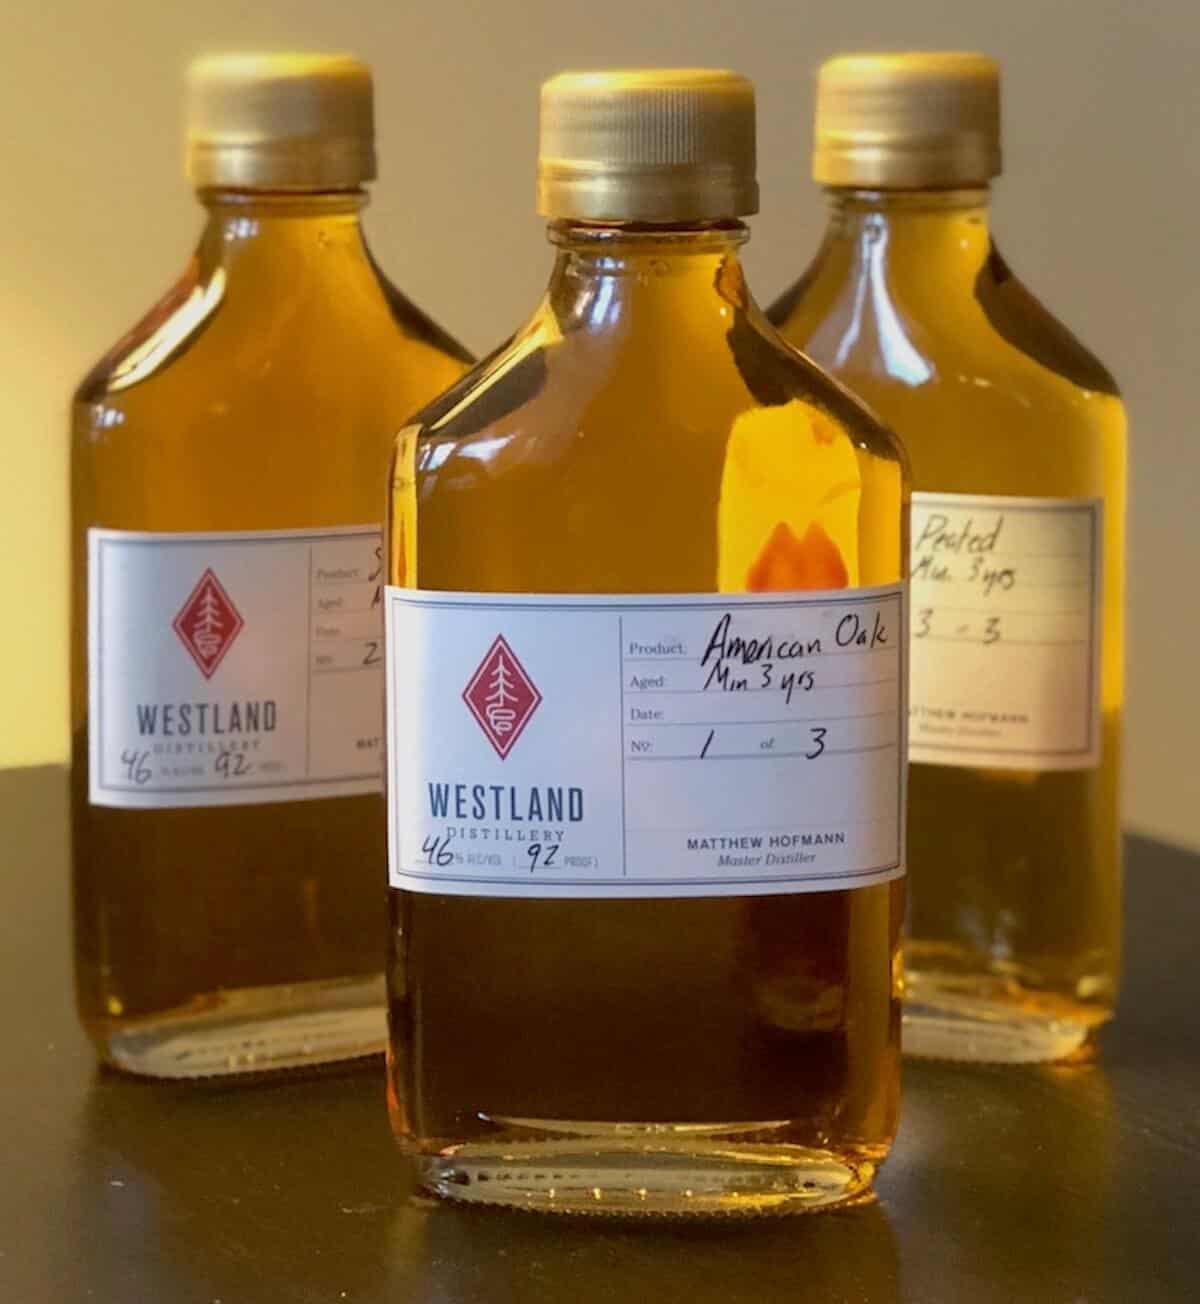 Westland American Single Malt sample bottles on a table with American Oak in foreground.